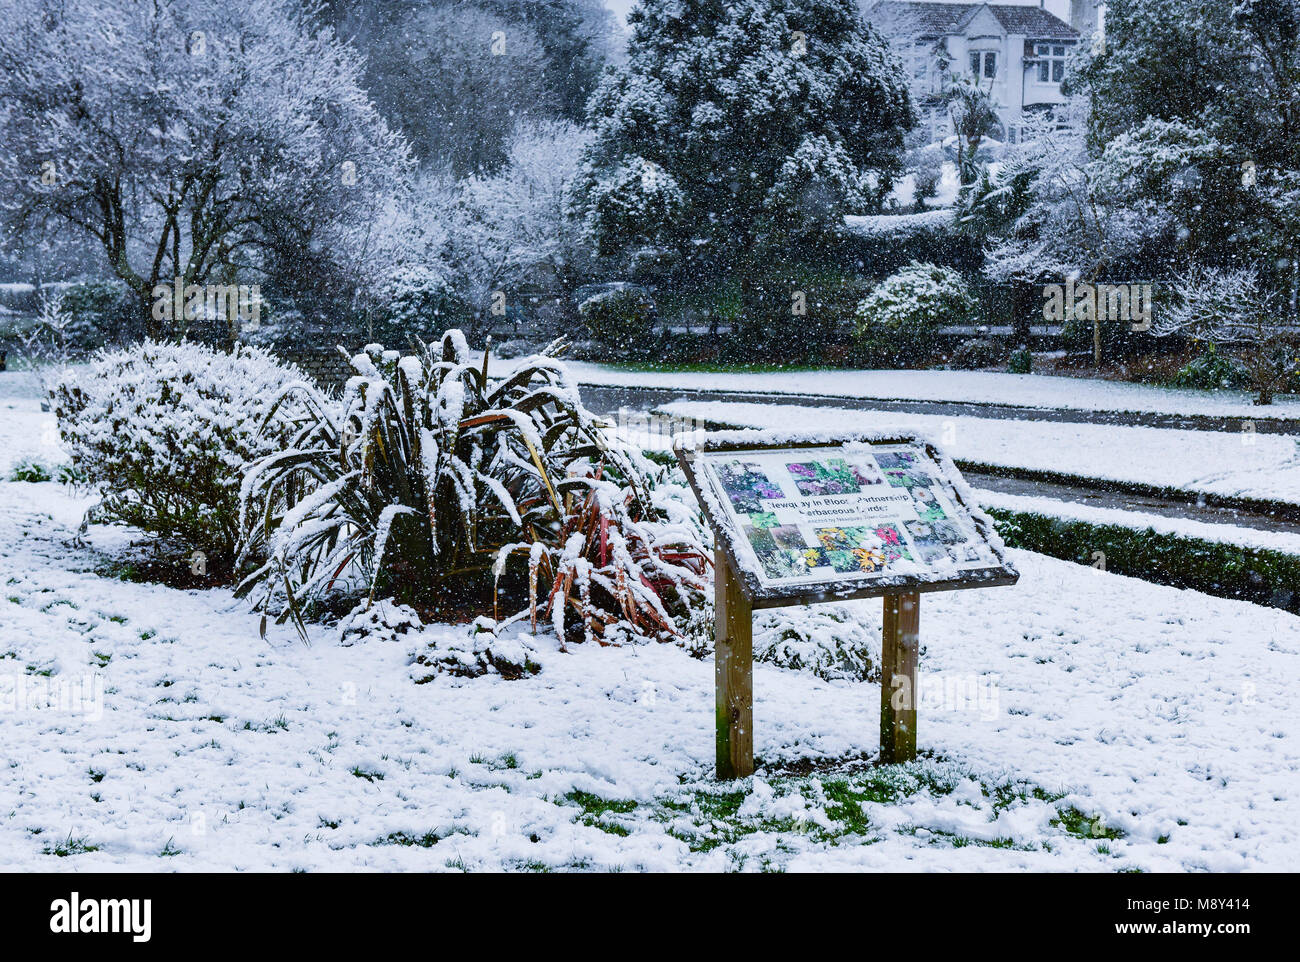 Snow falling in Trenance Gardens in Newquay Cornwall. Stock Photo